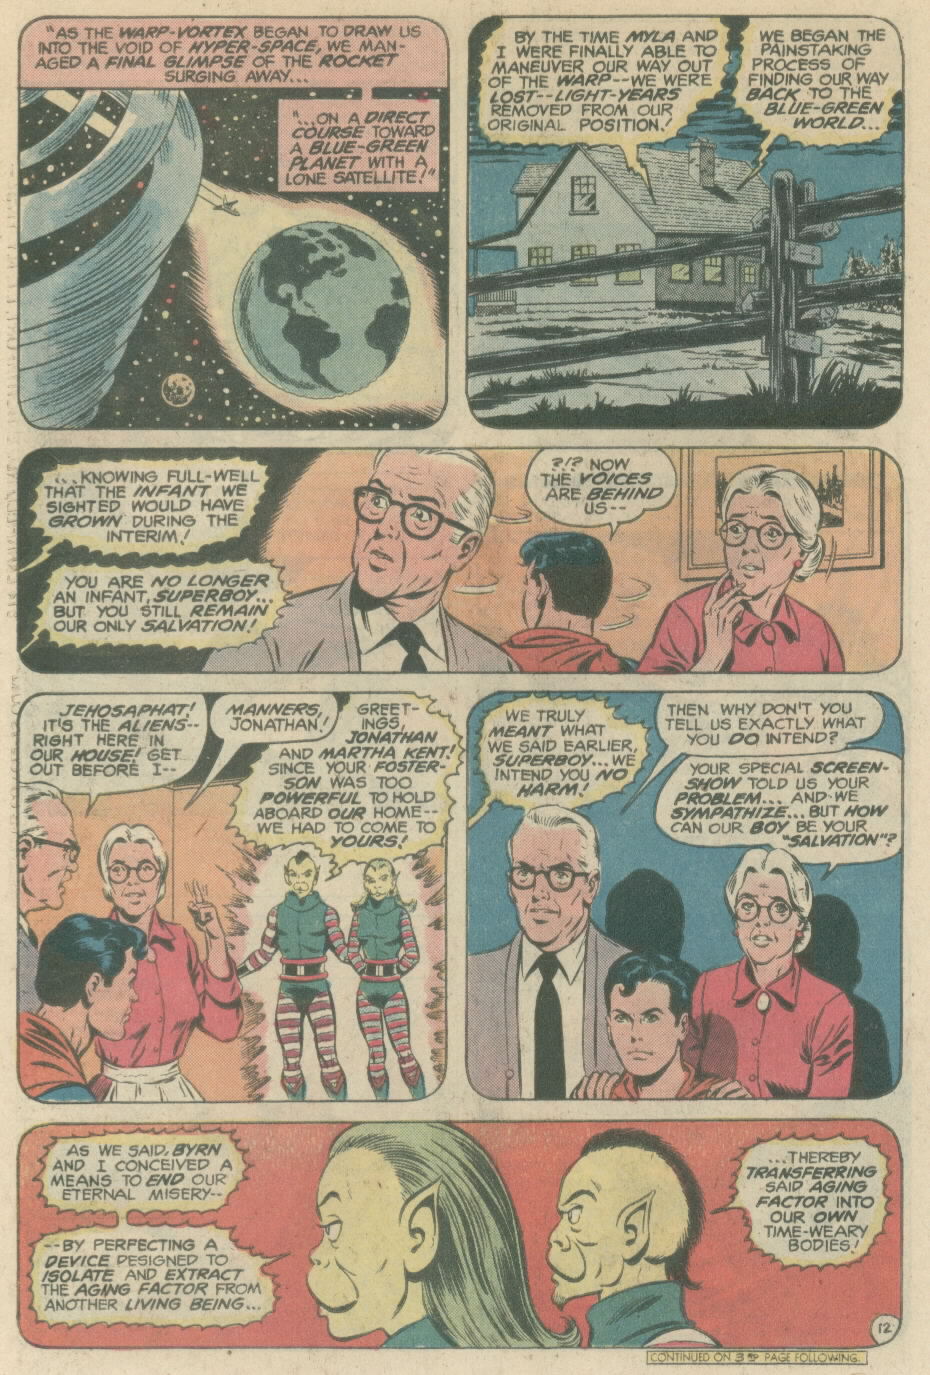 The New Adventures of Superboy 1 Page 12